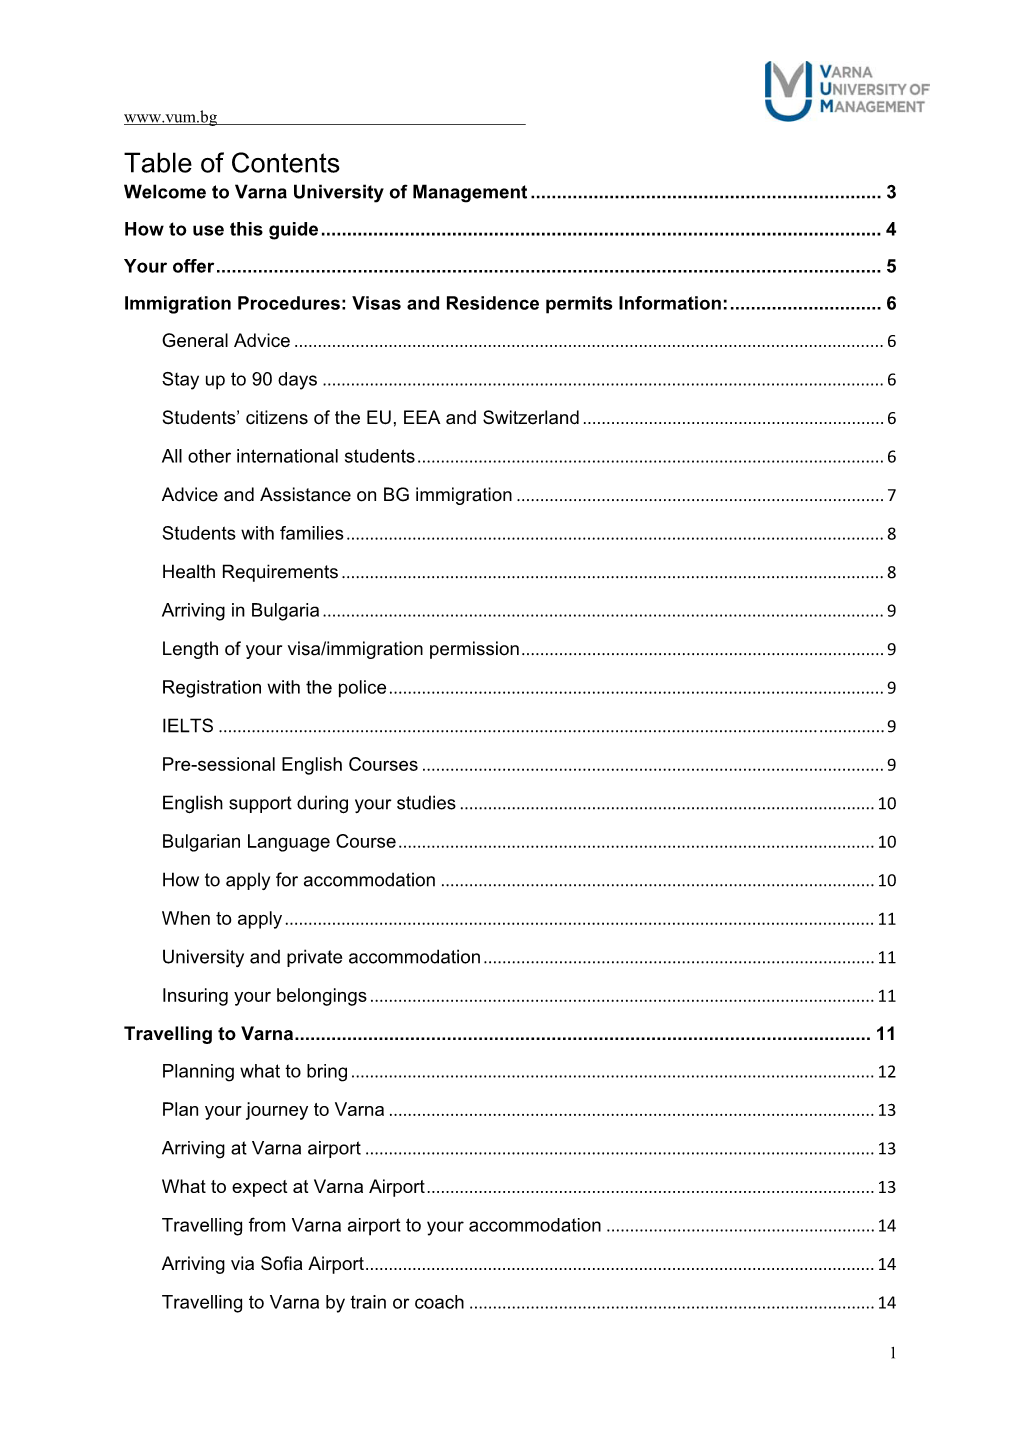 Table of Contents Welcome to Varna University of Management